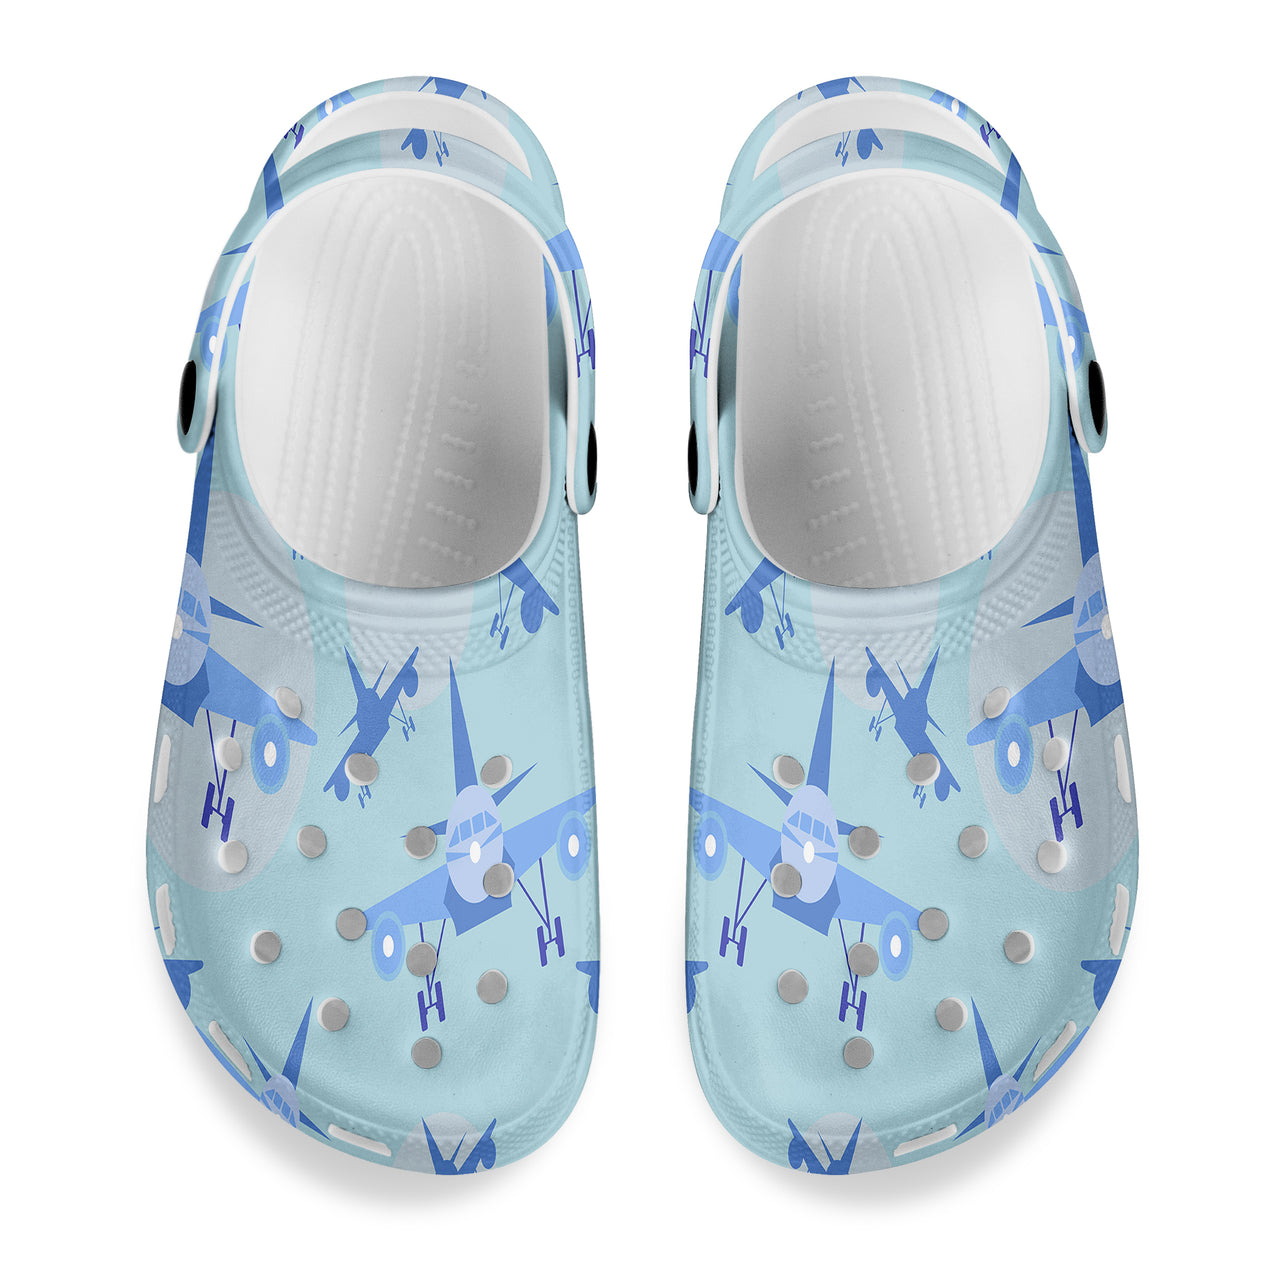 Super Funny Airplanes Designed Hole Shoes & Slippers (WOMEN)